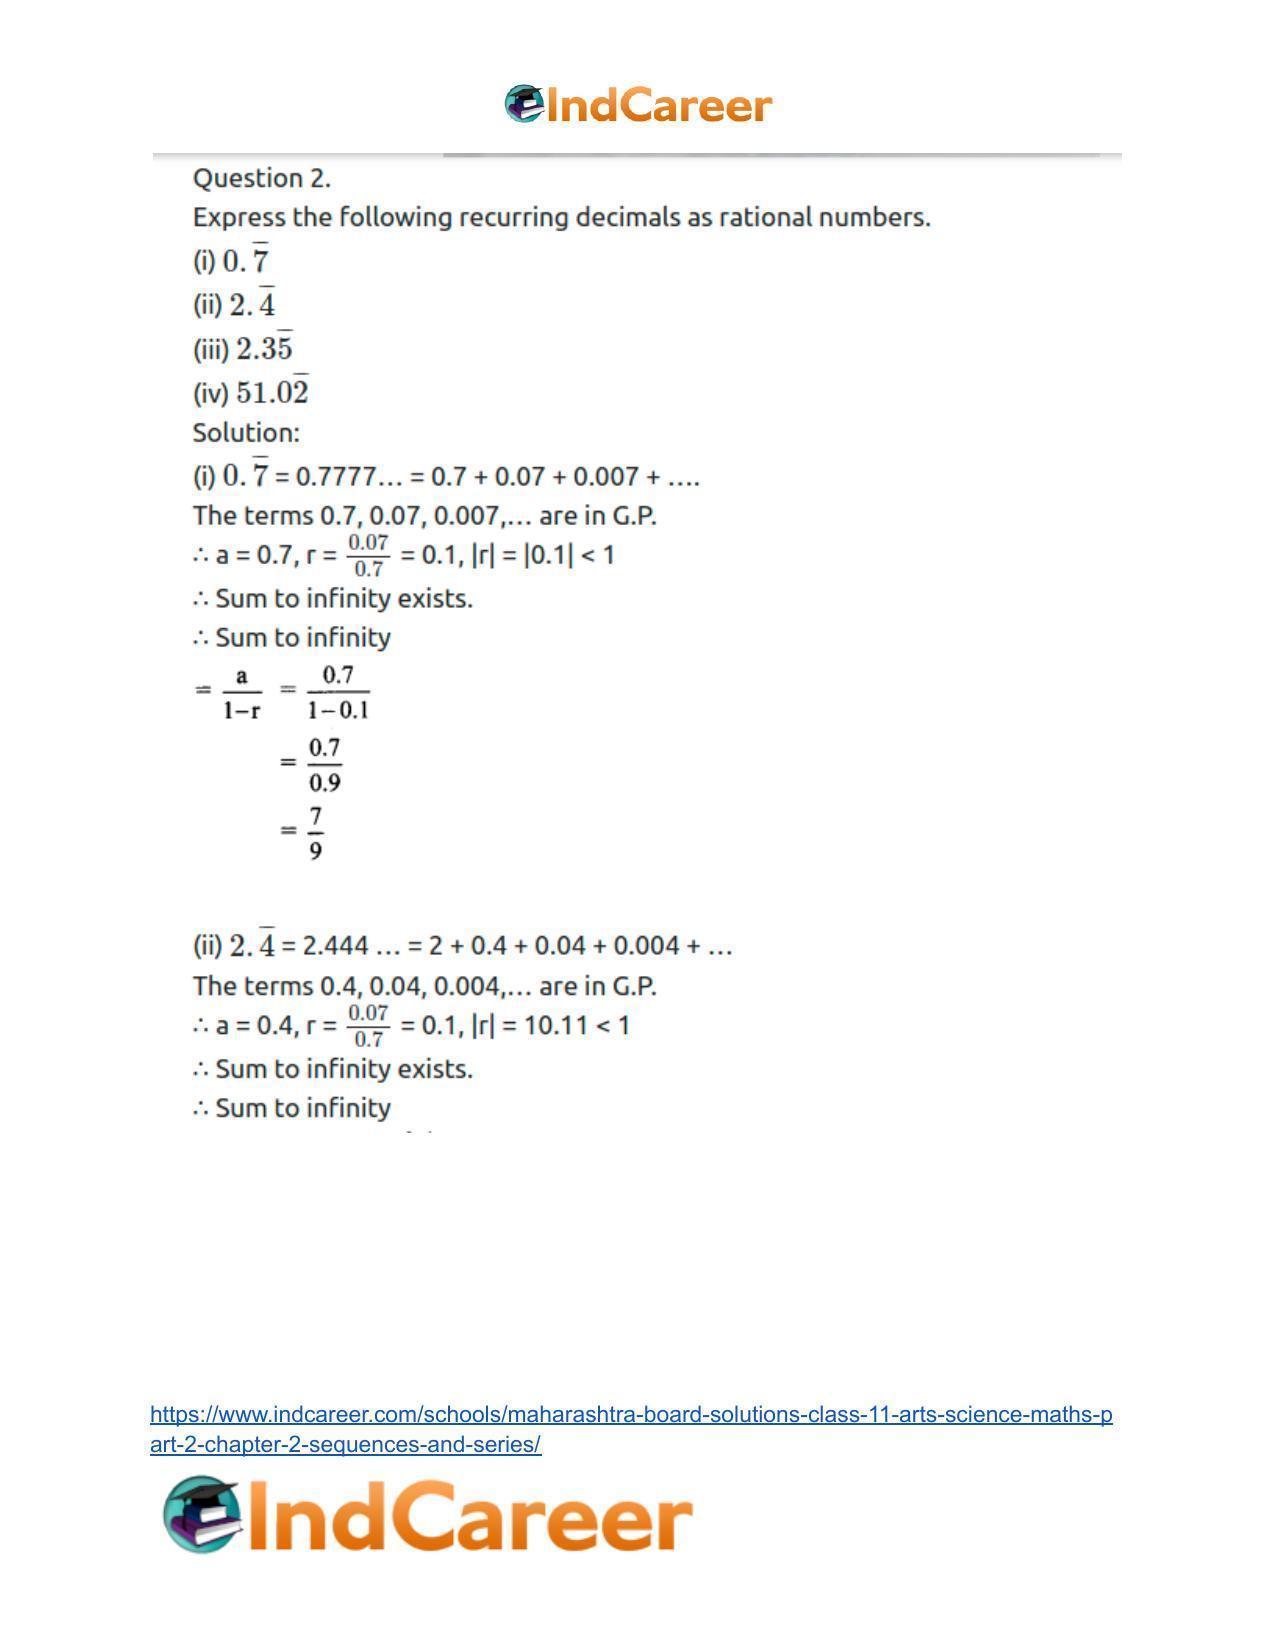 Maharashtra Board Solutions Class 11-Arts & Science Maths (Part 2): Chapter 2- Sequences and Series - Page 41